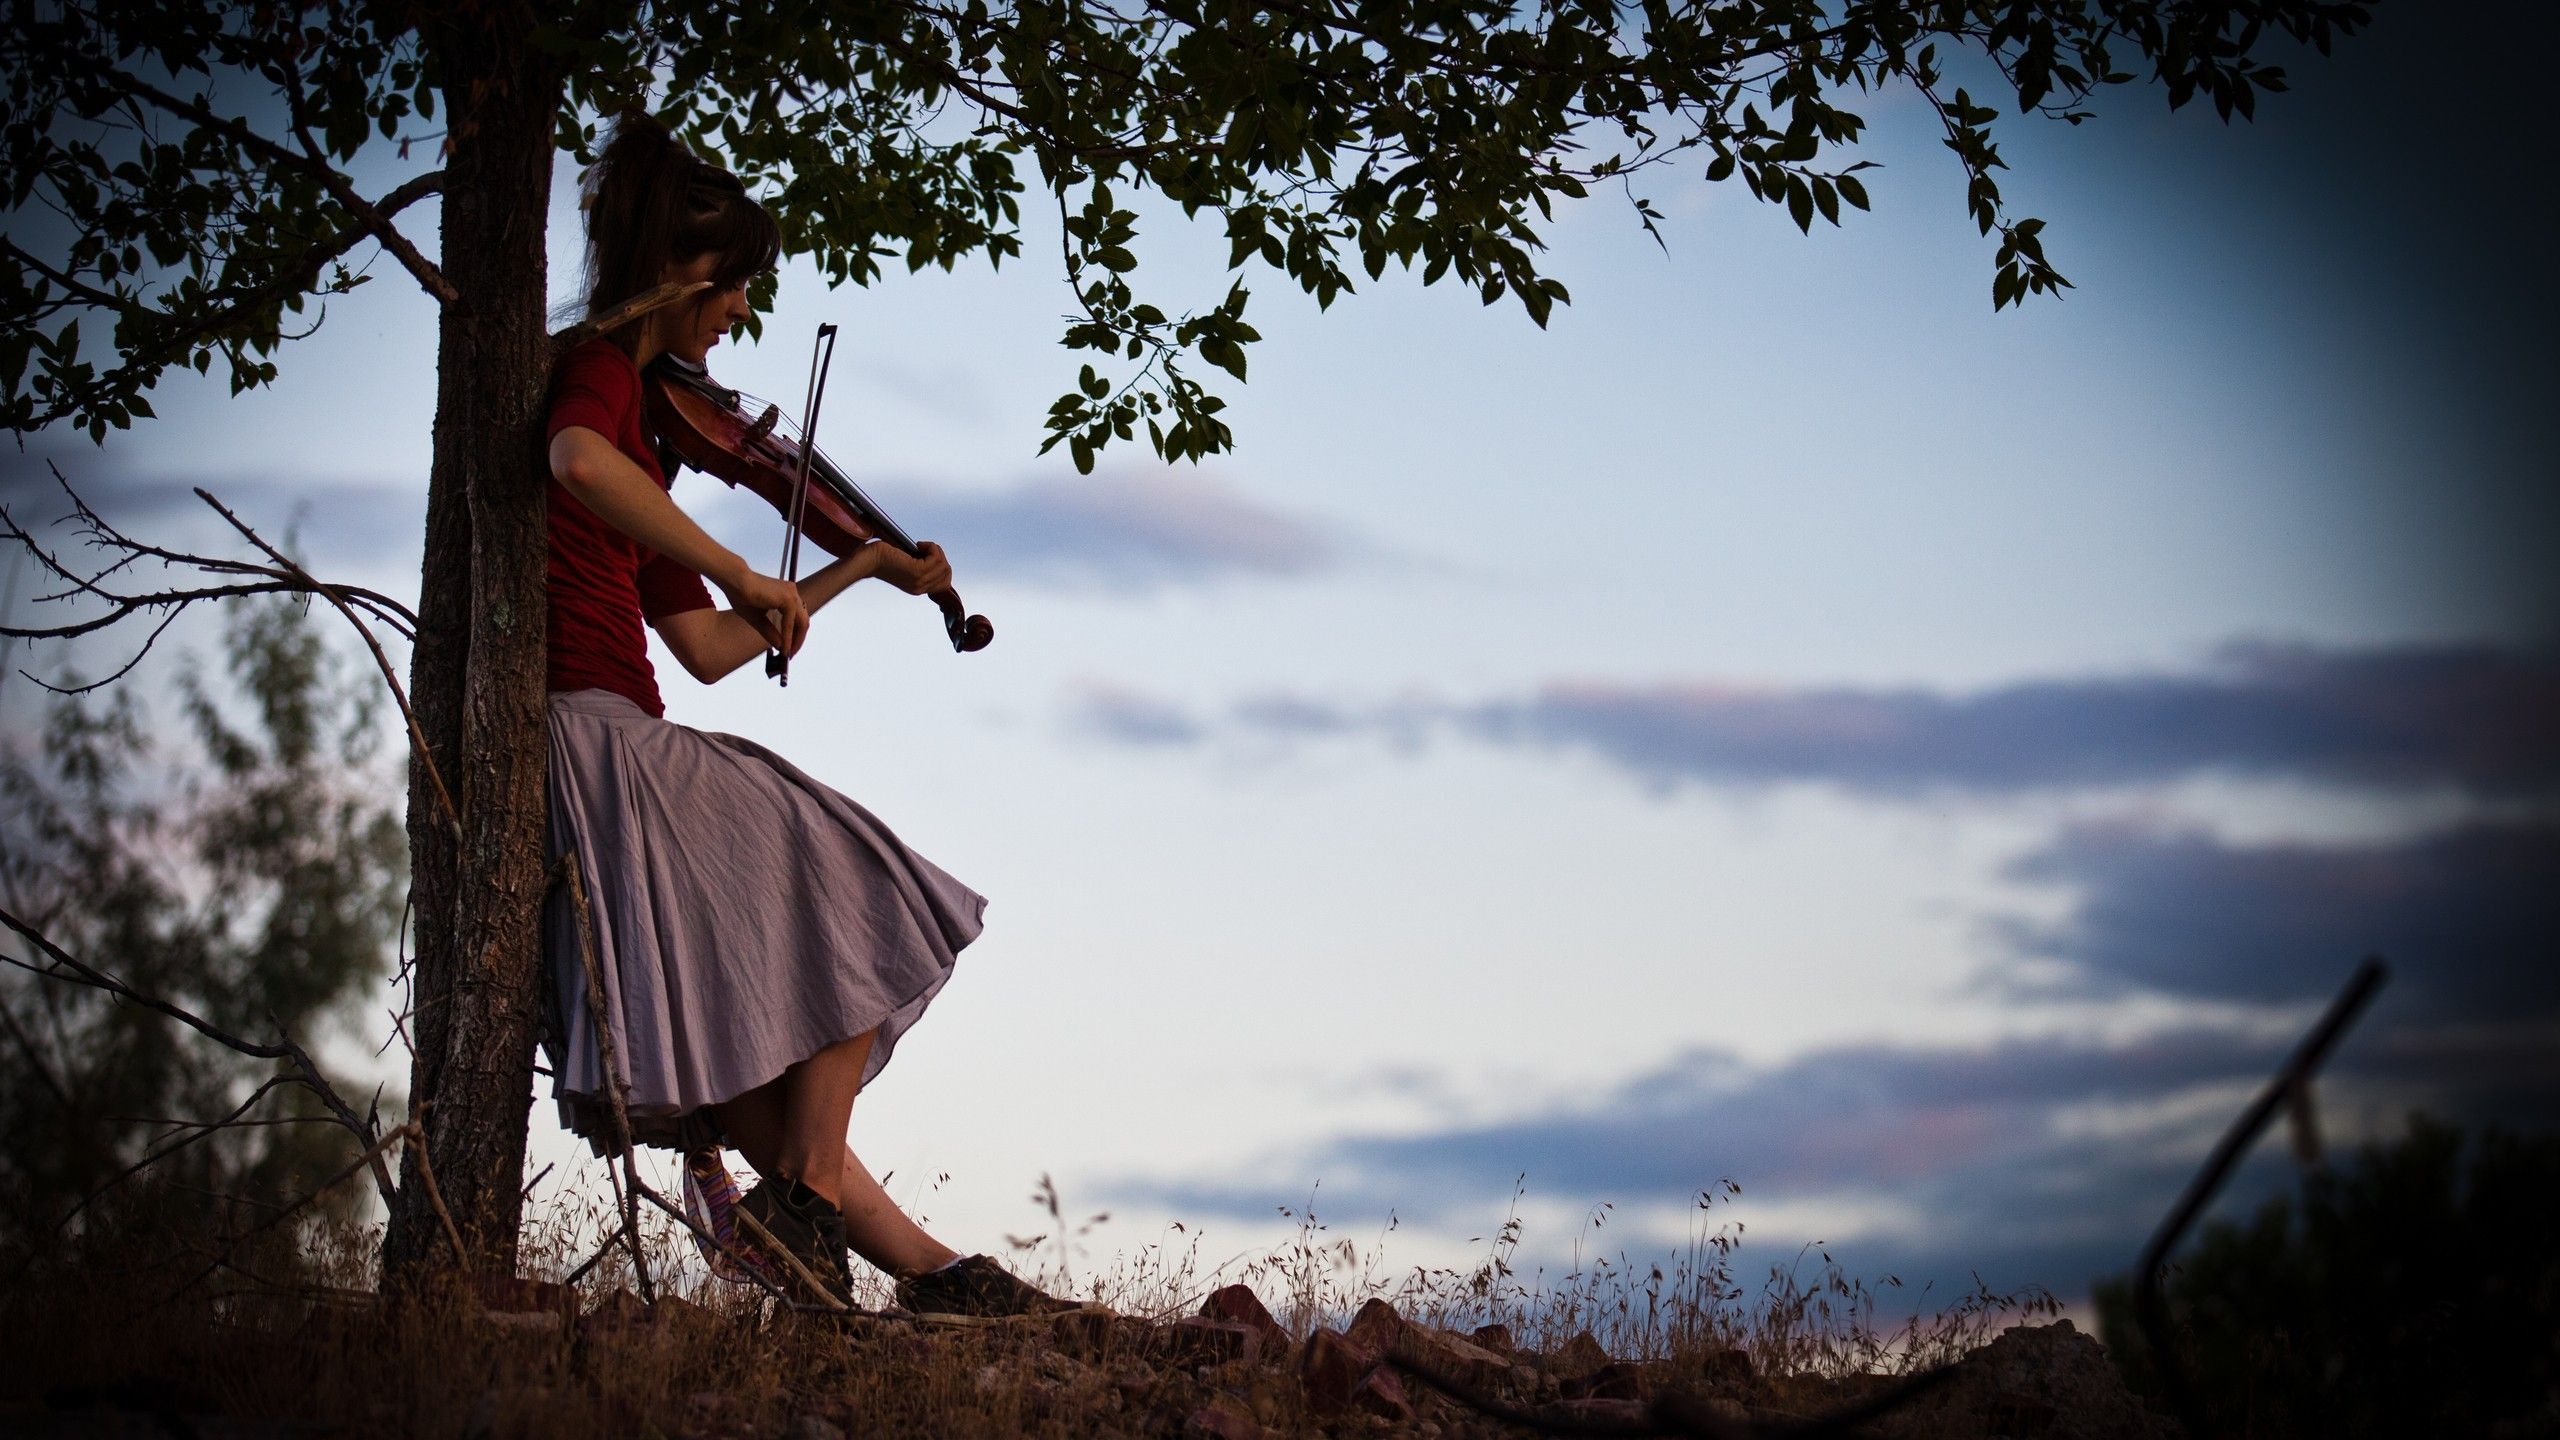 Violin: Lindsey Stirling, YouTube Star, Famous Over The Internet With Her Dance-And-Playing Performances. 2560x1440 HD Wallpaper.